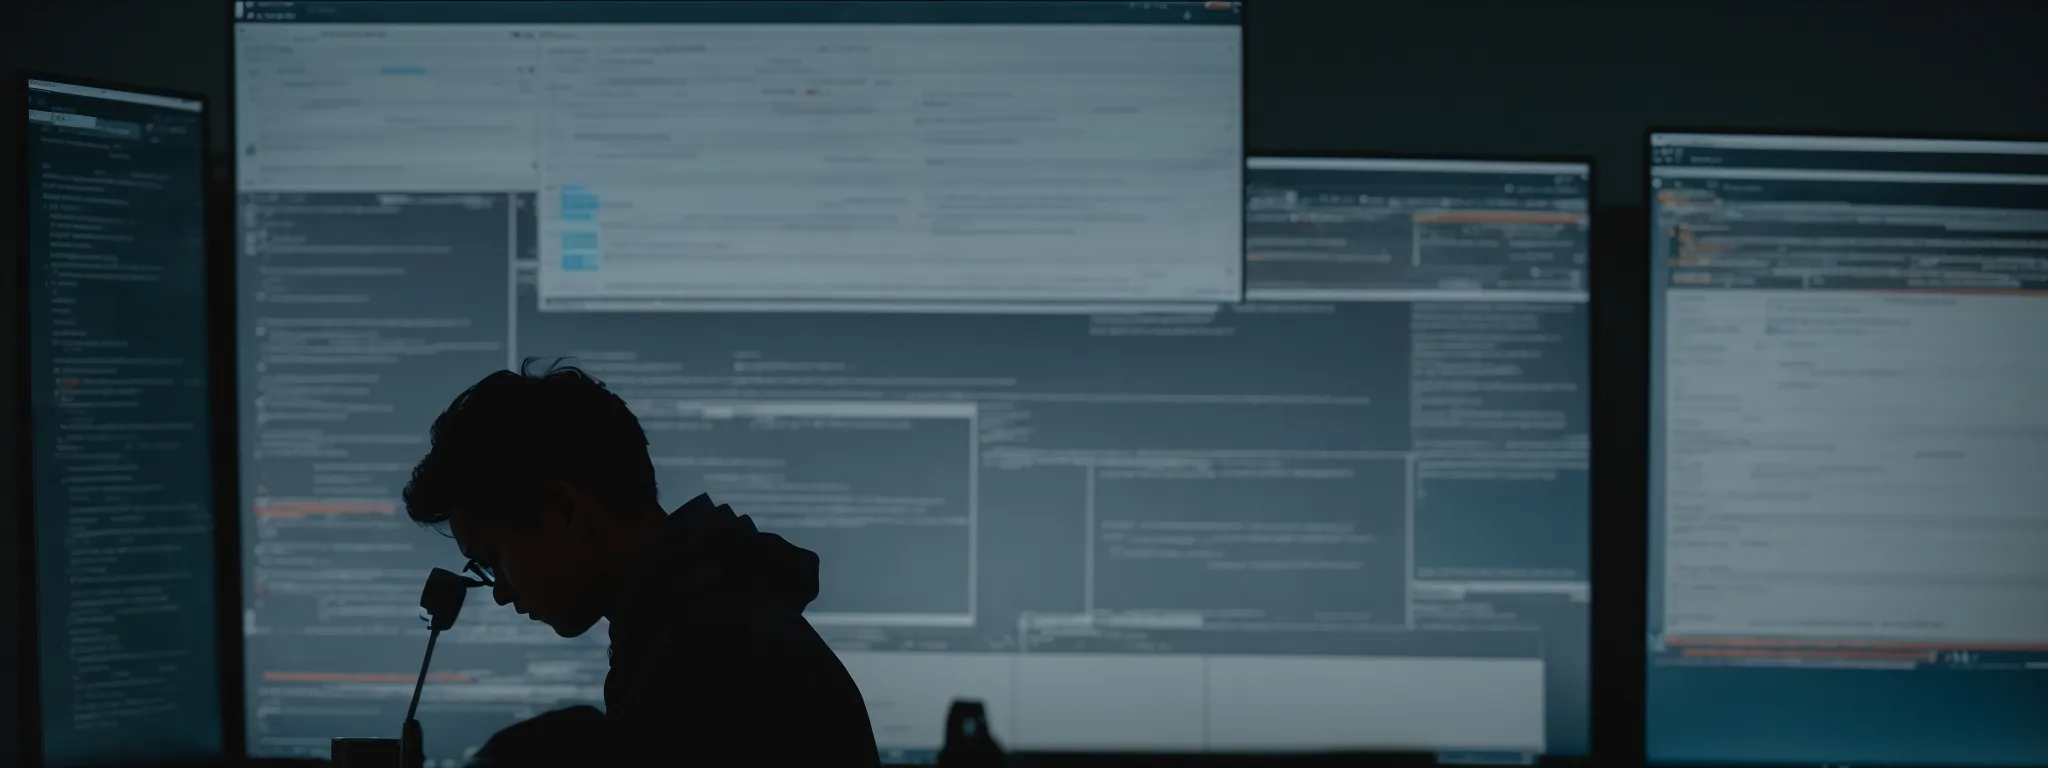 a silhouette of a person working on a computer with search engine result pages on the screen, highlighting the intersection of content creation and seo strategies.